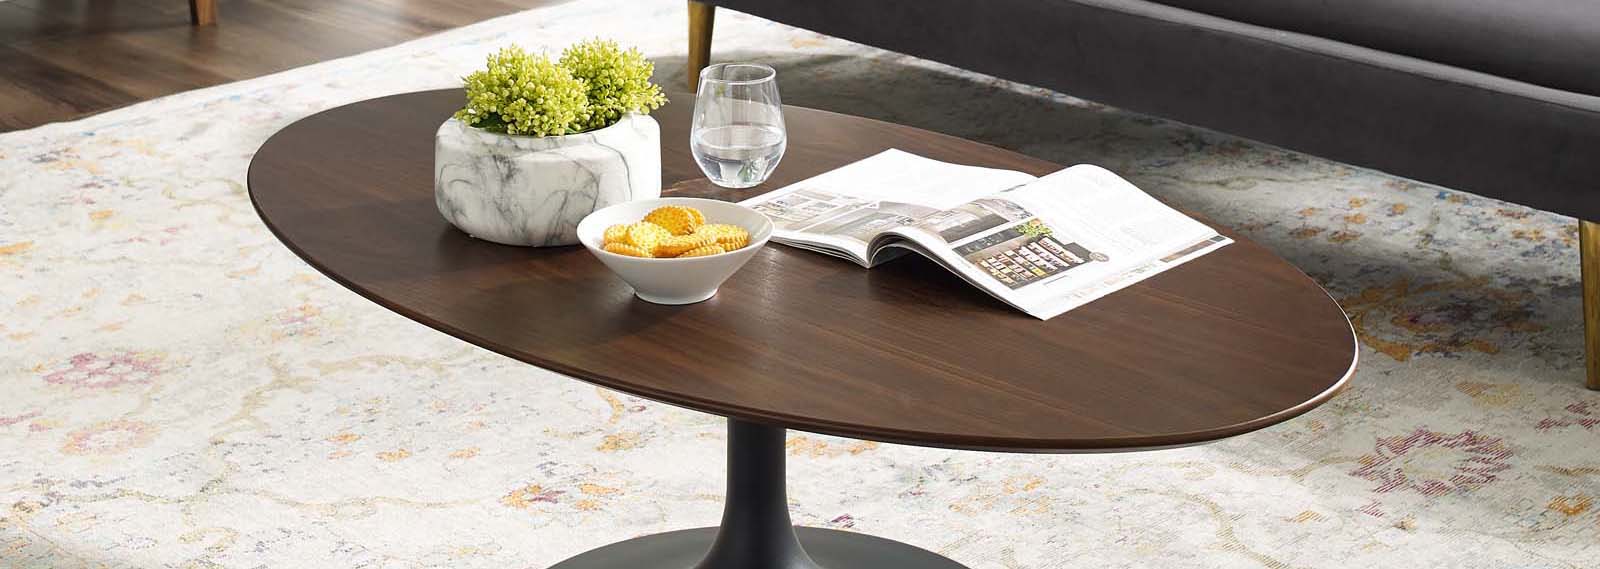 Shop Coffee Tables at Homethreads and Save